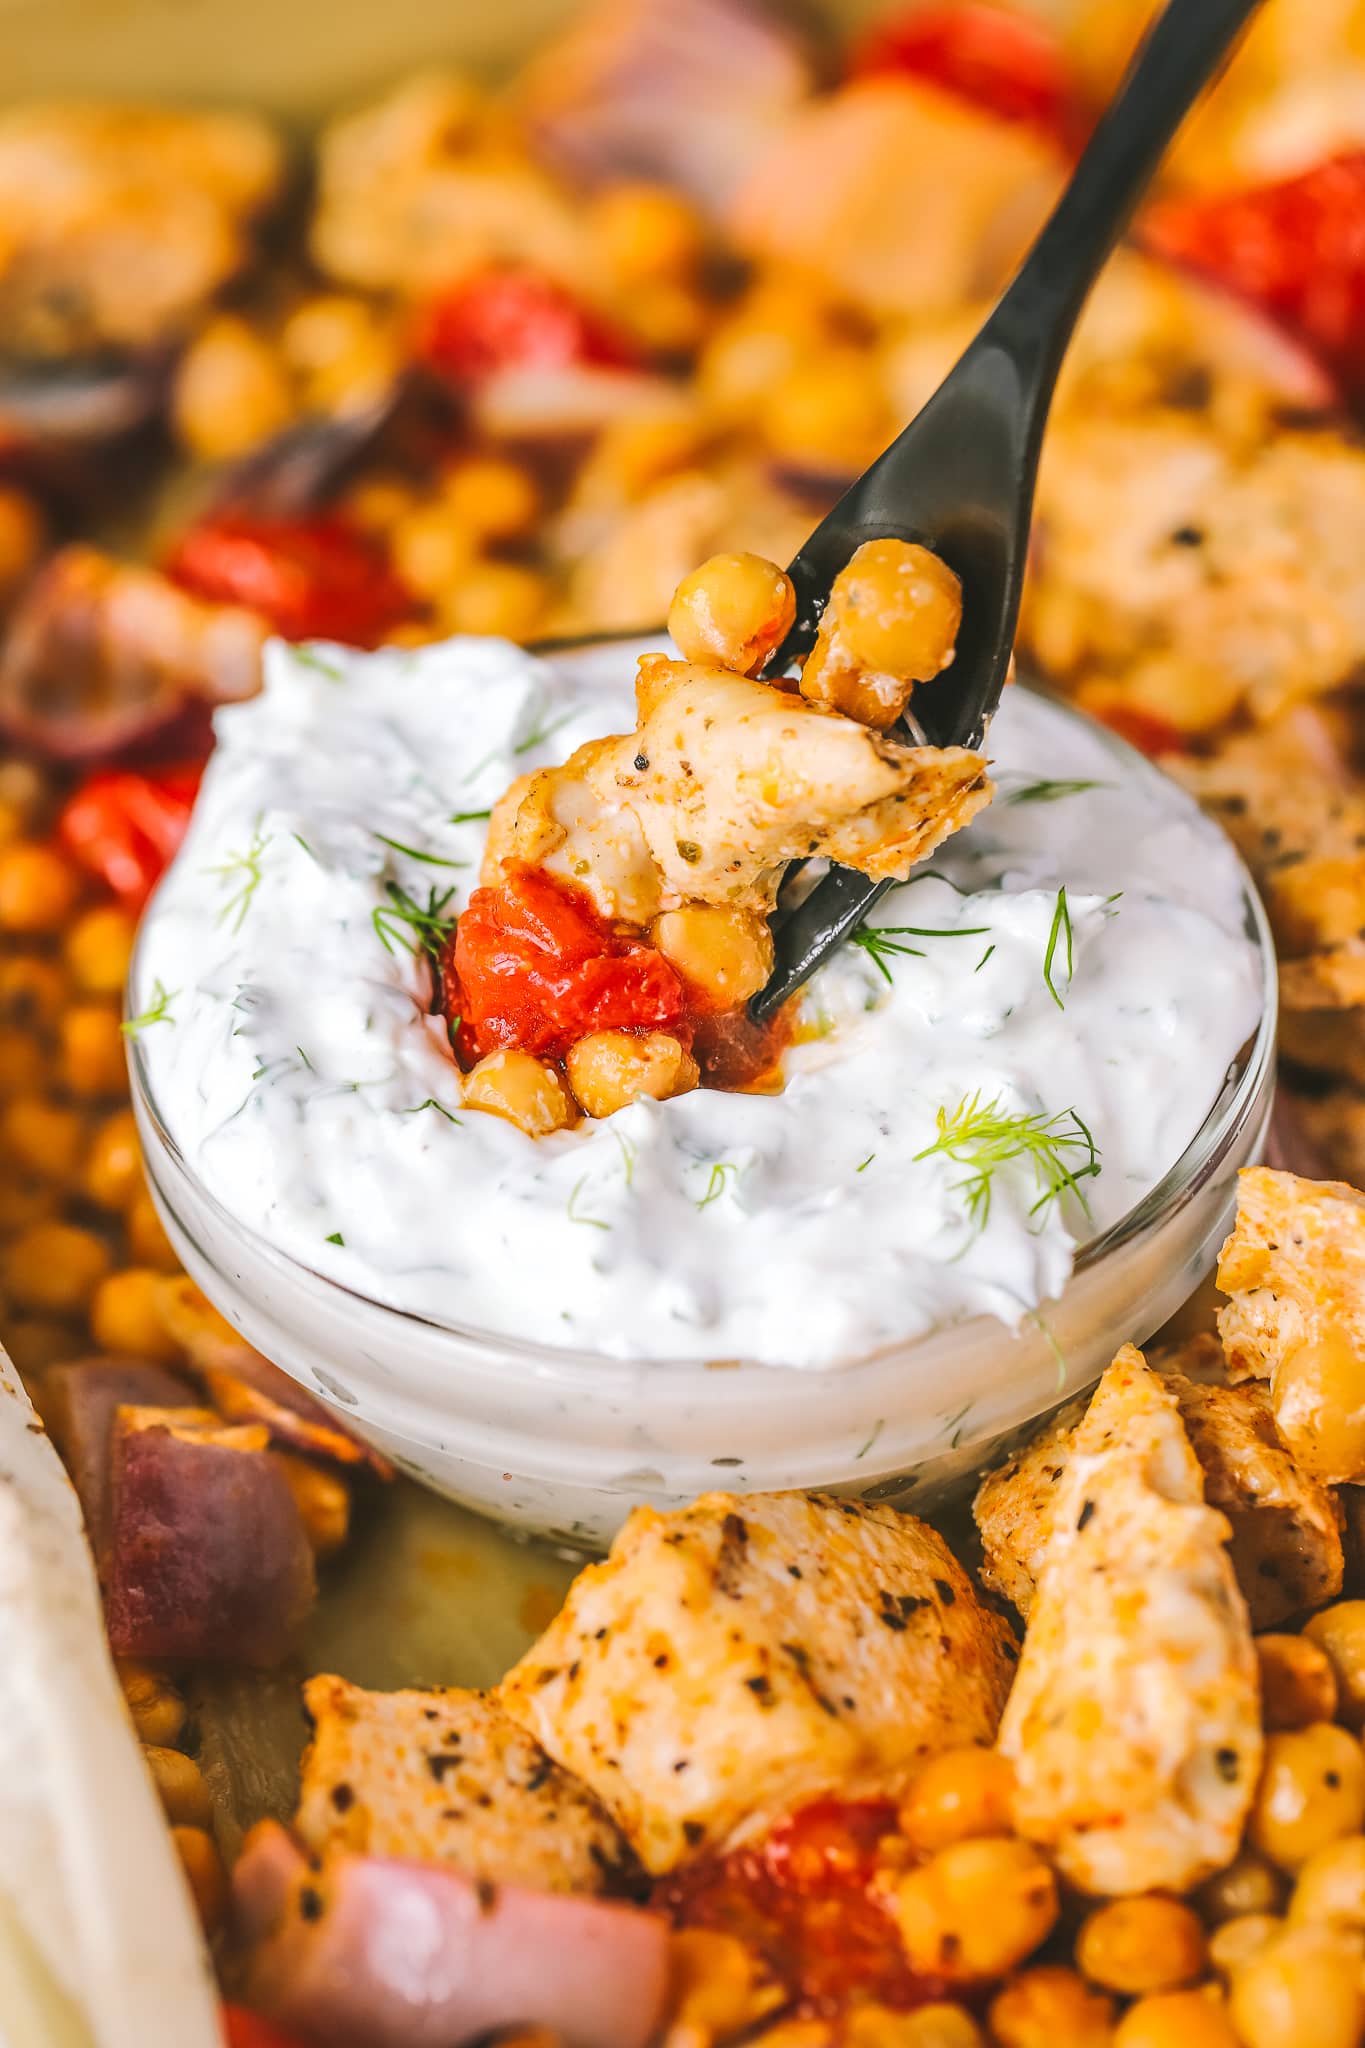 forkful of chickpeas, chicken and tomatoes dipping into herby yogurt sauce